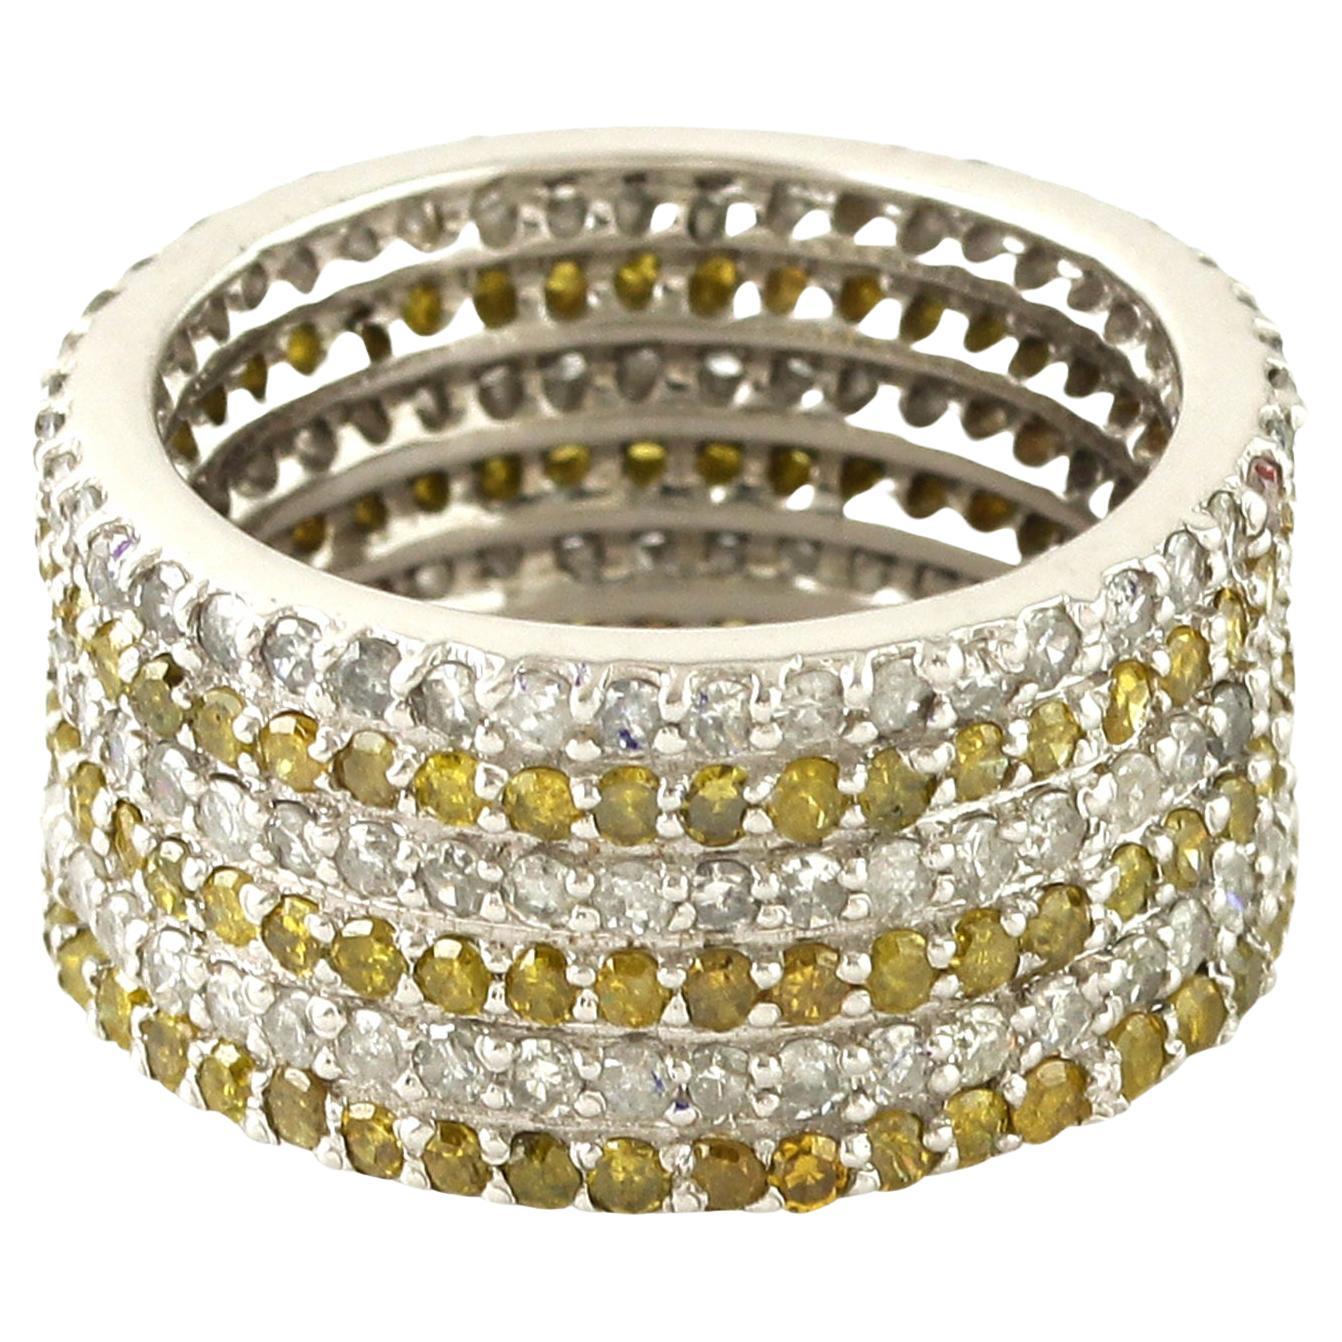 Yellow & White Pave Diamond Band Ring Made In 14k White Gold